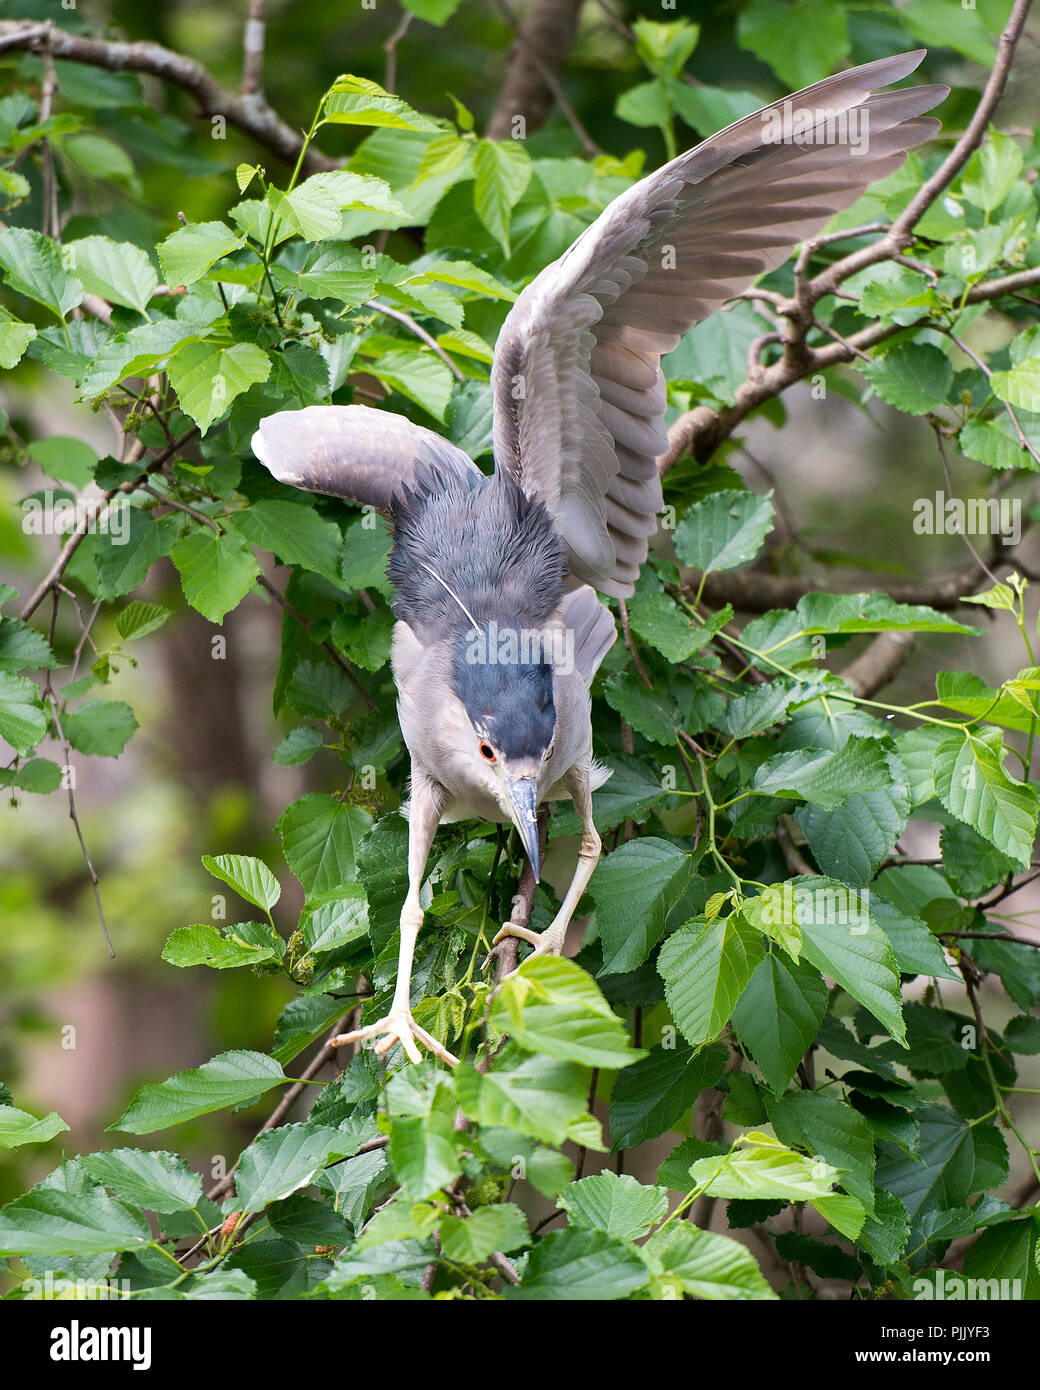 Black-Crowned Night-Heron bird with wing spread in its environment. Stock Photo